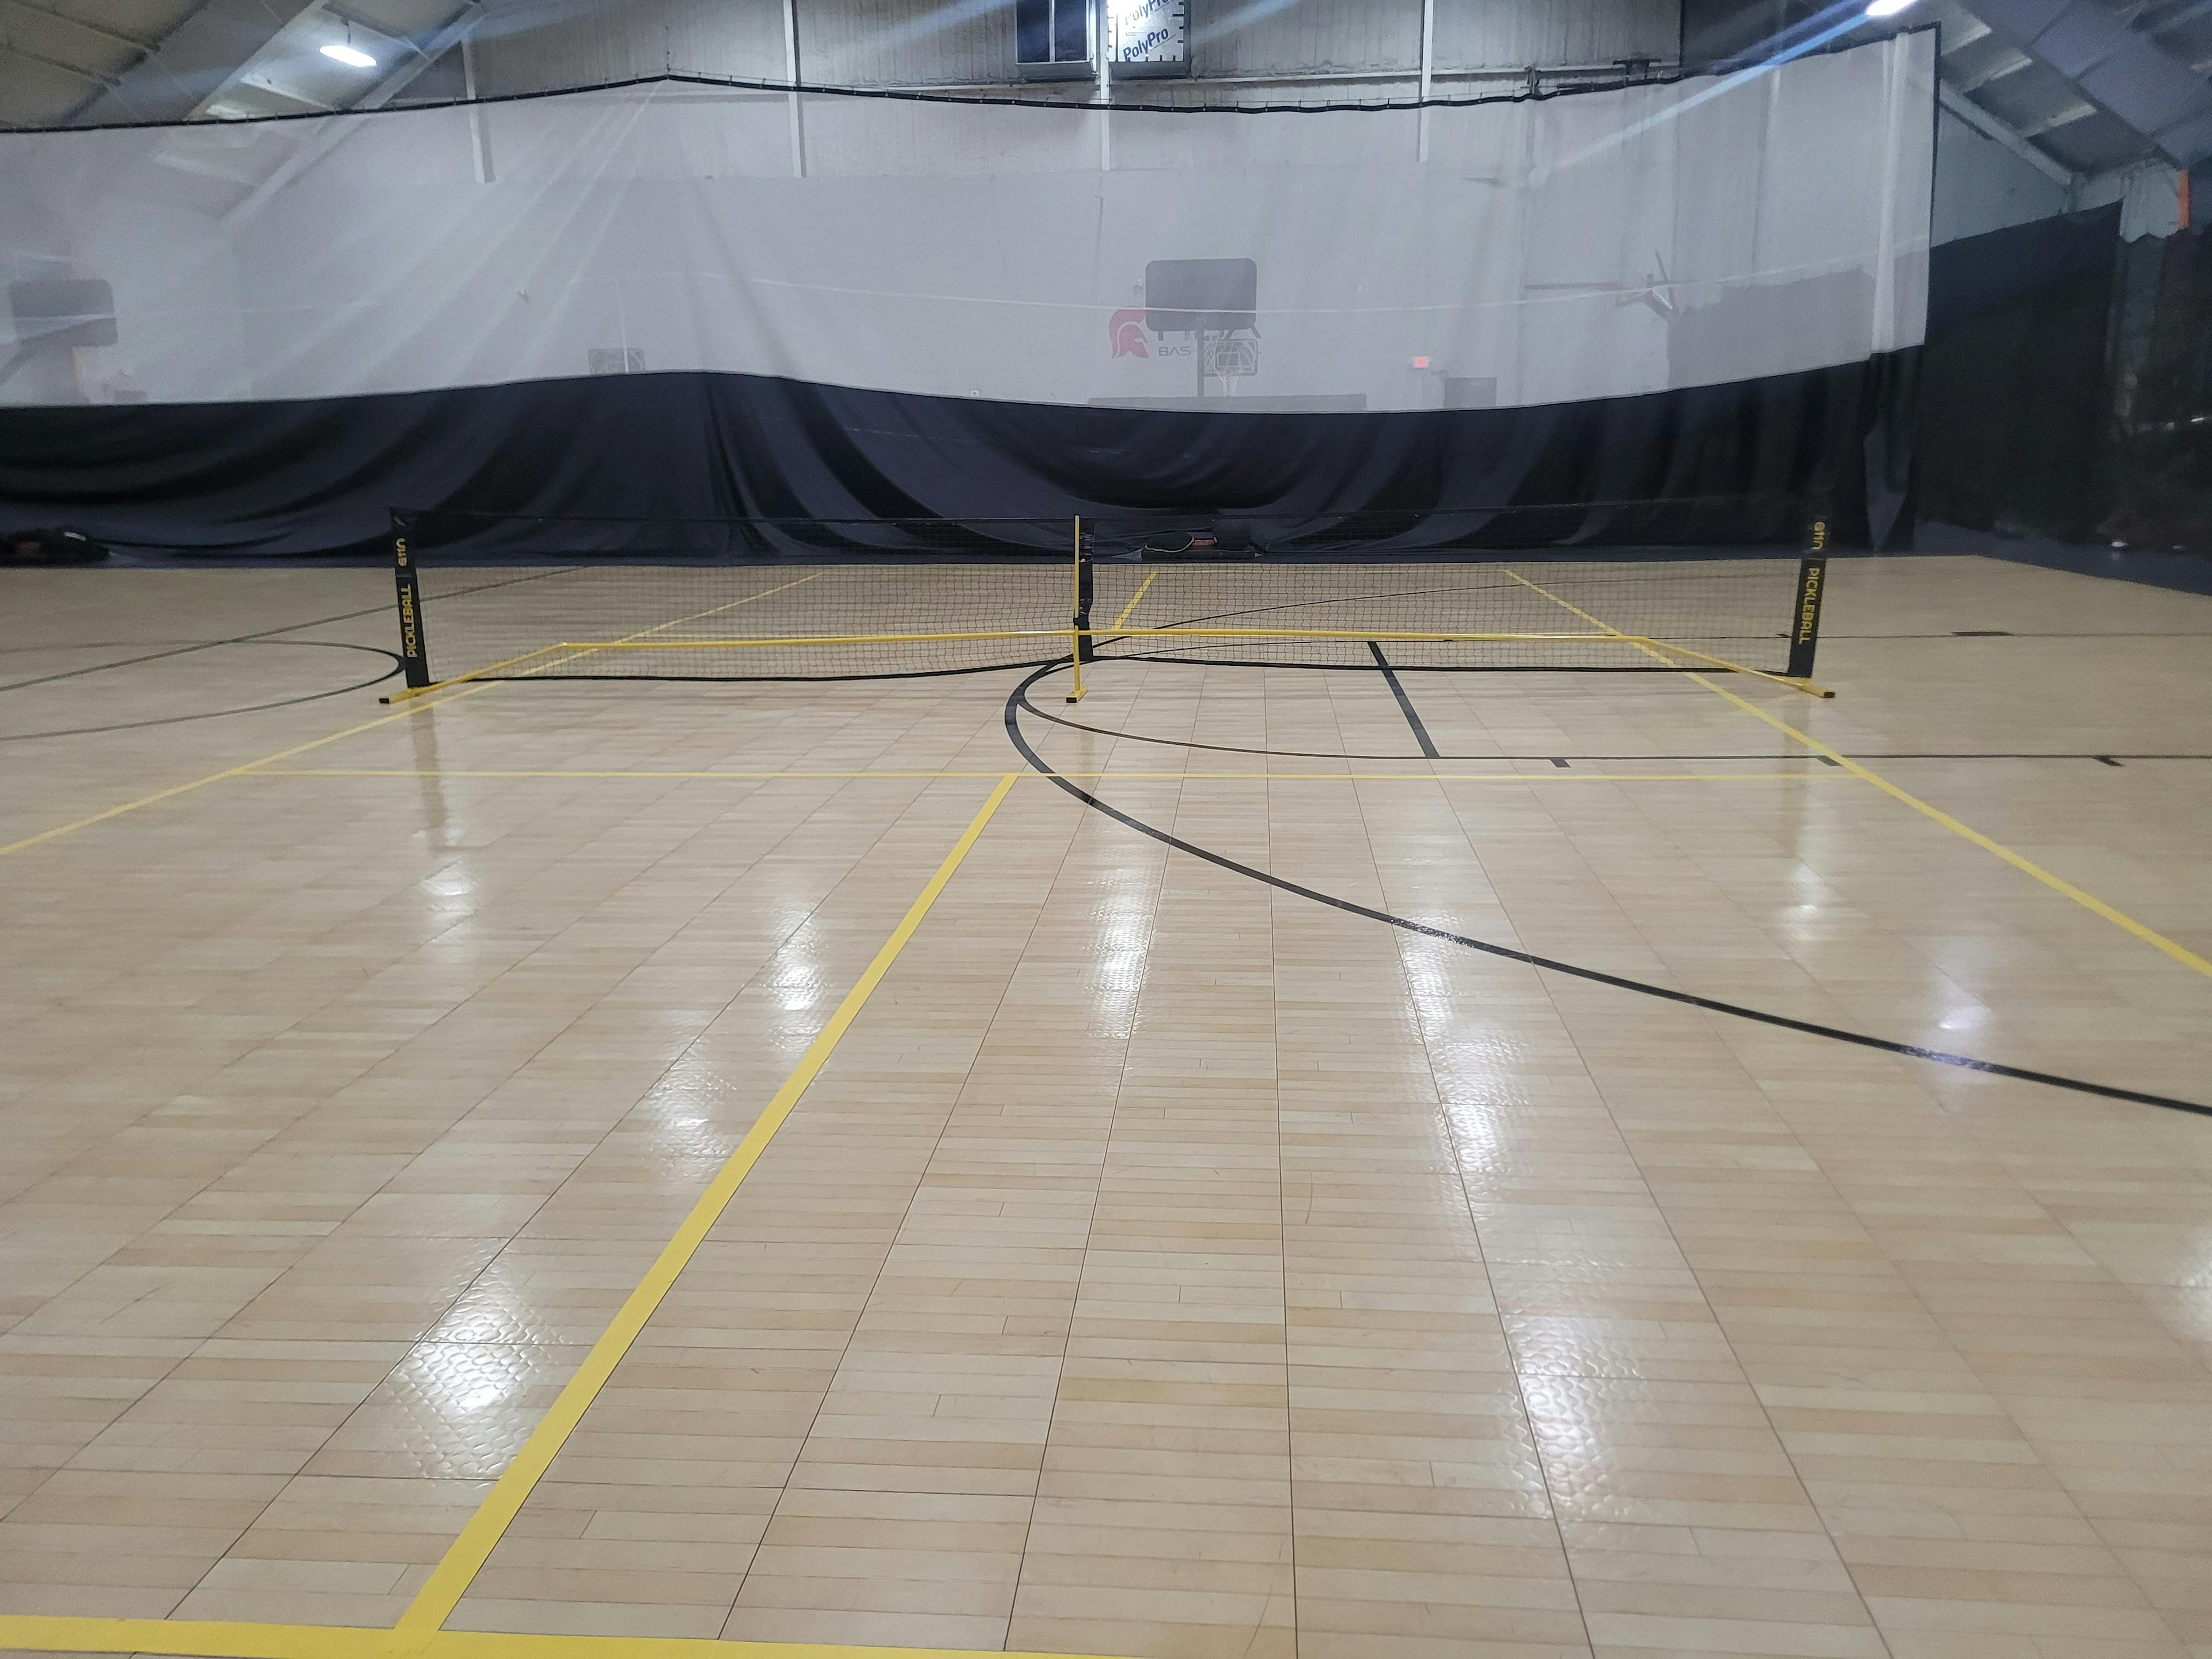 Image 6 of 10 of Nex Level Sports and Fitness court